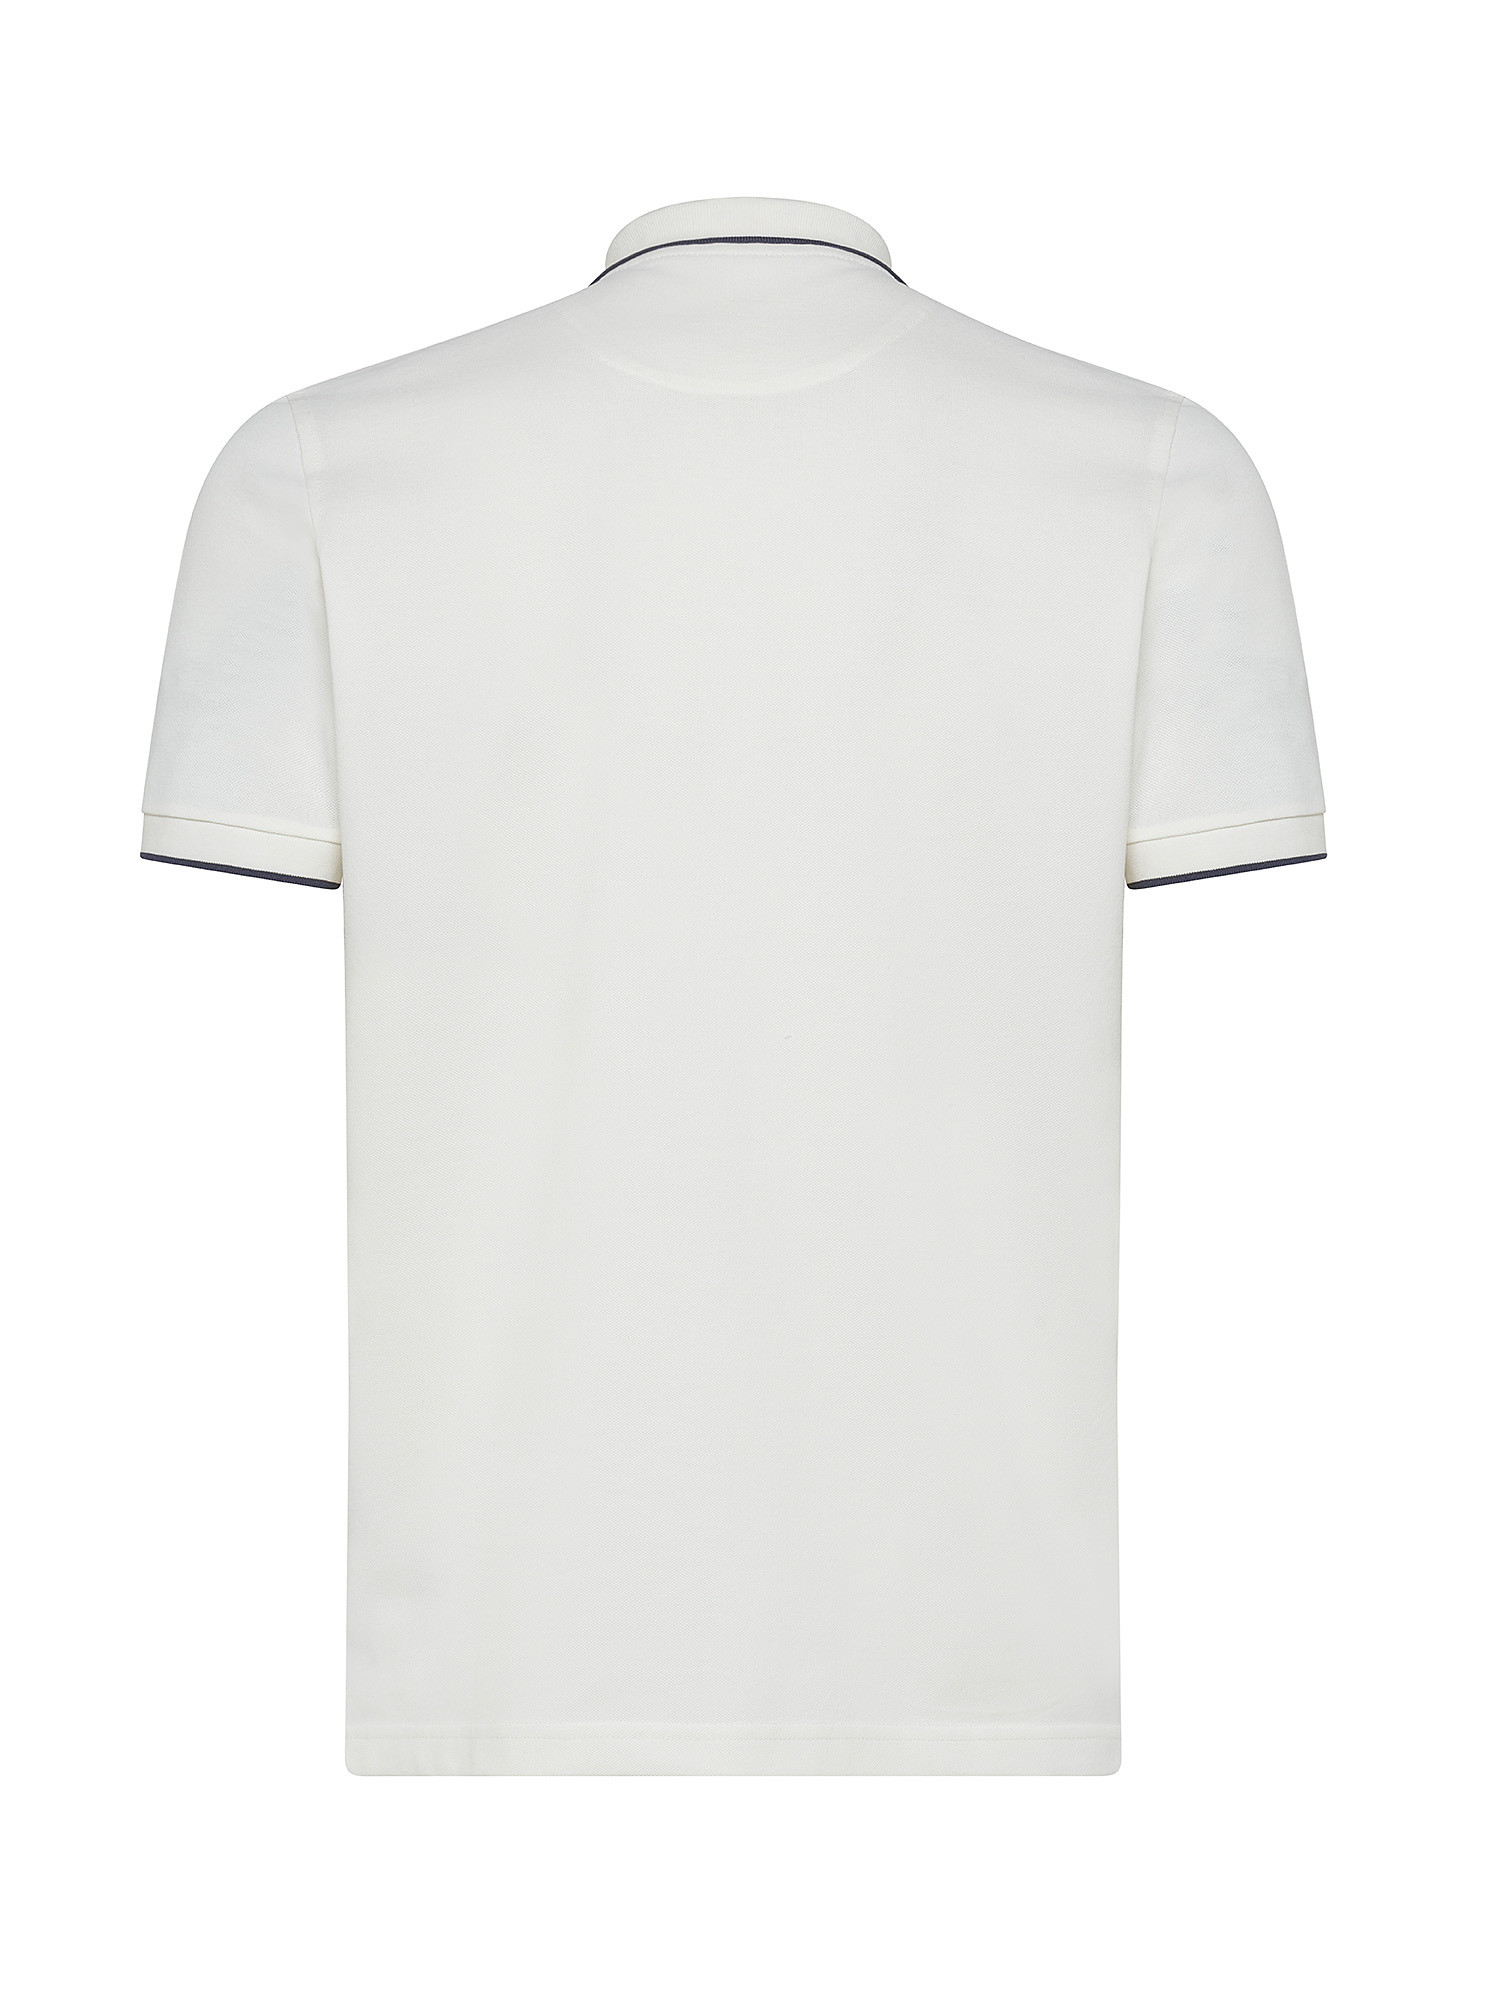 Manuel Ritz - Polo with contrasting edges and logo, White, large image number 1